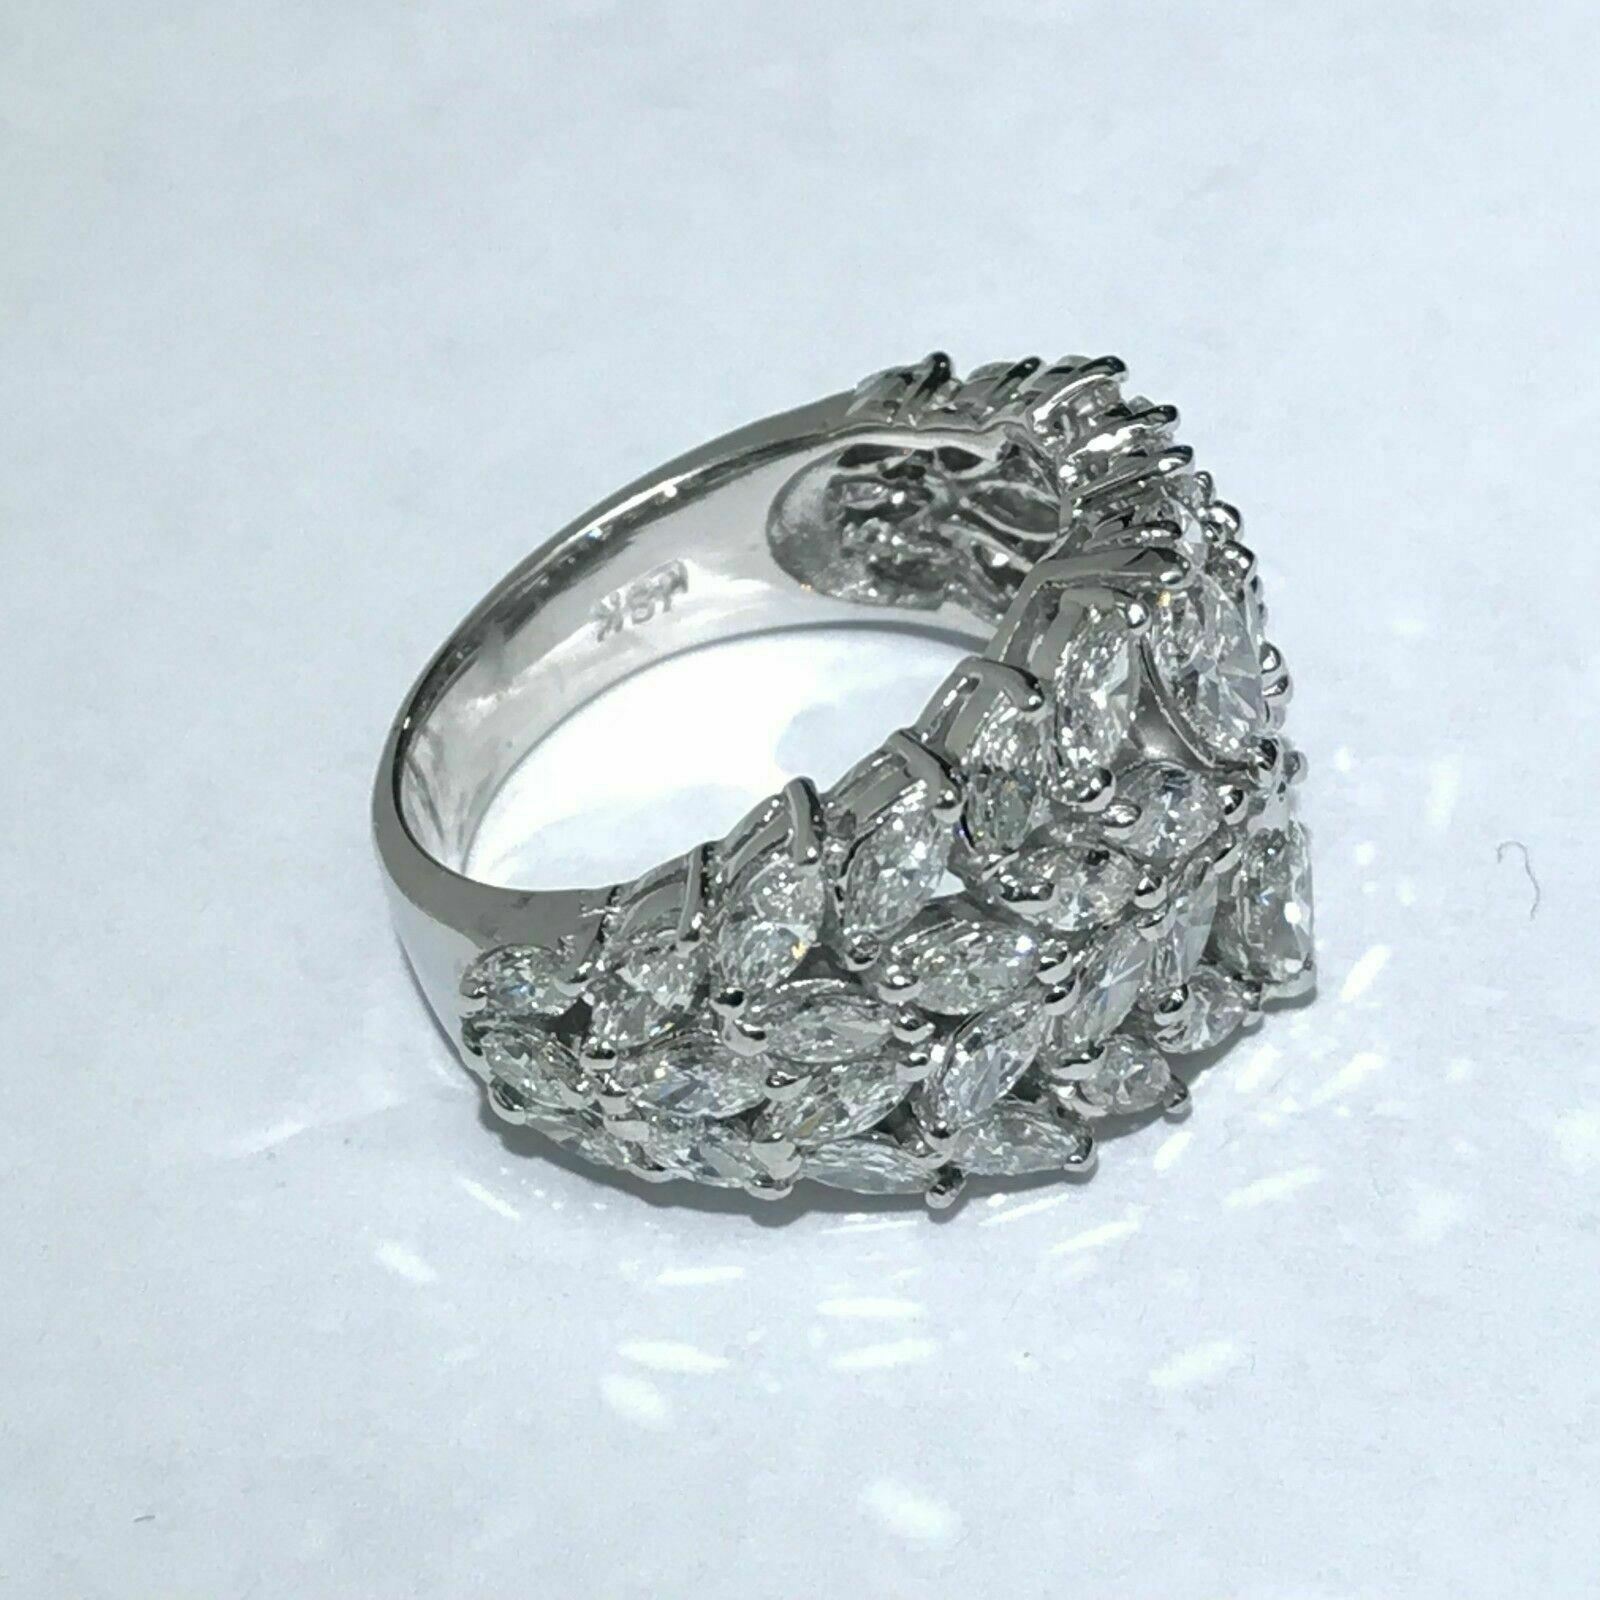 3.65Ct Marquise Cut Cluster Diamond Cocktail Ring Band Size 7.5 18k White Gold